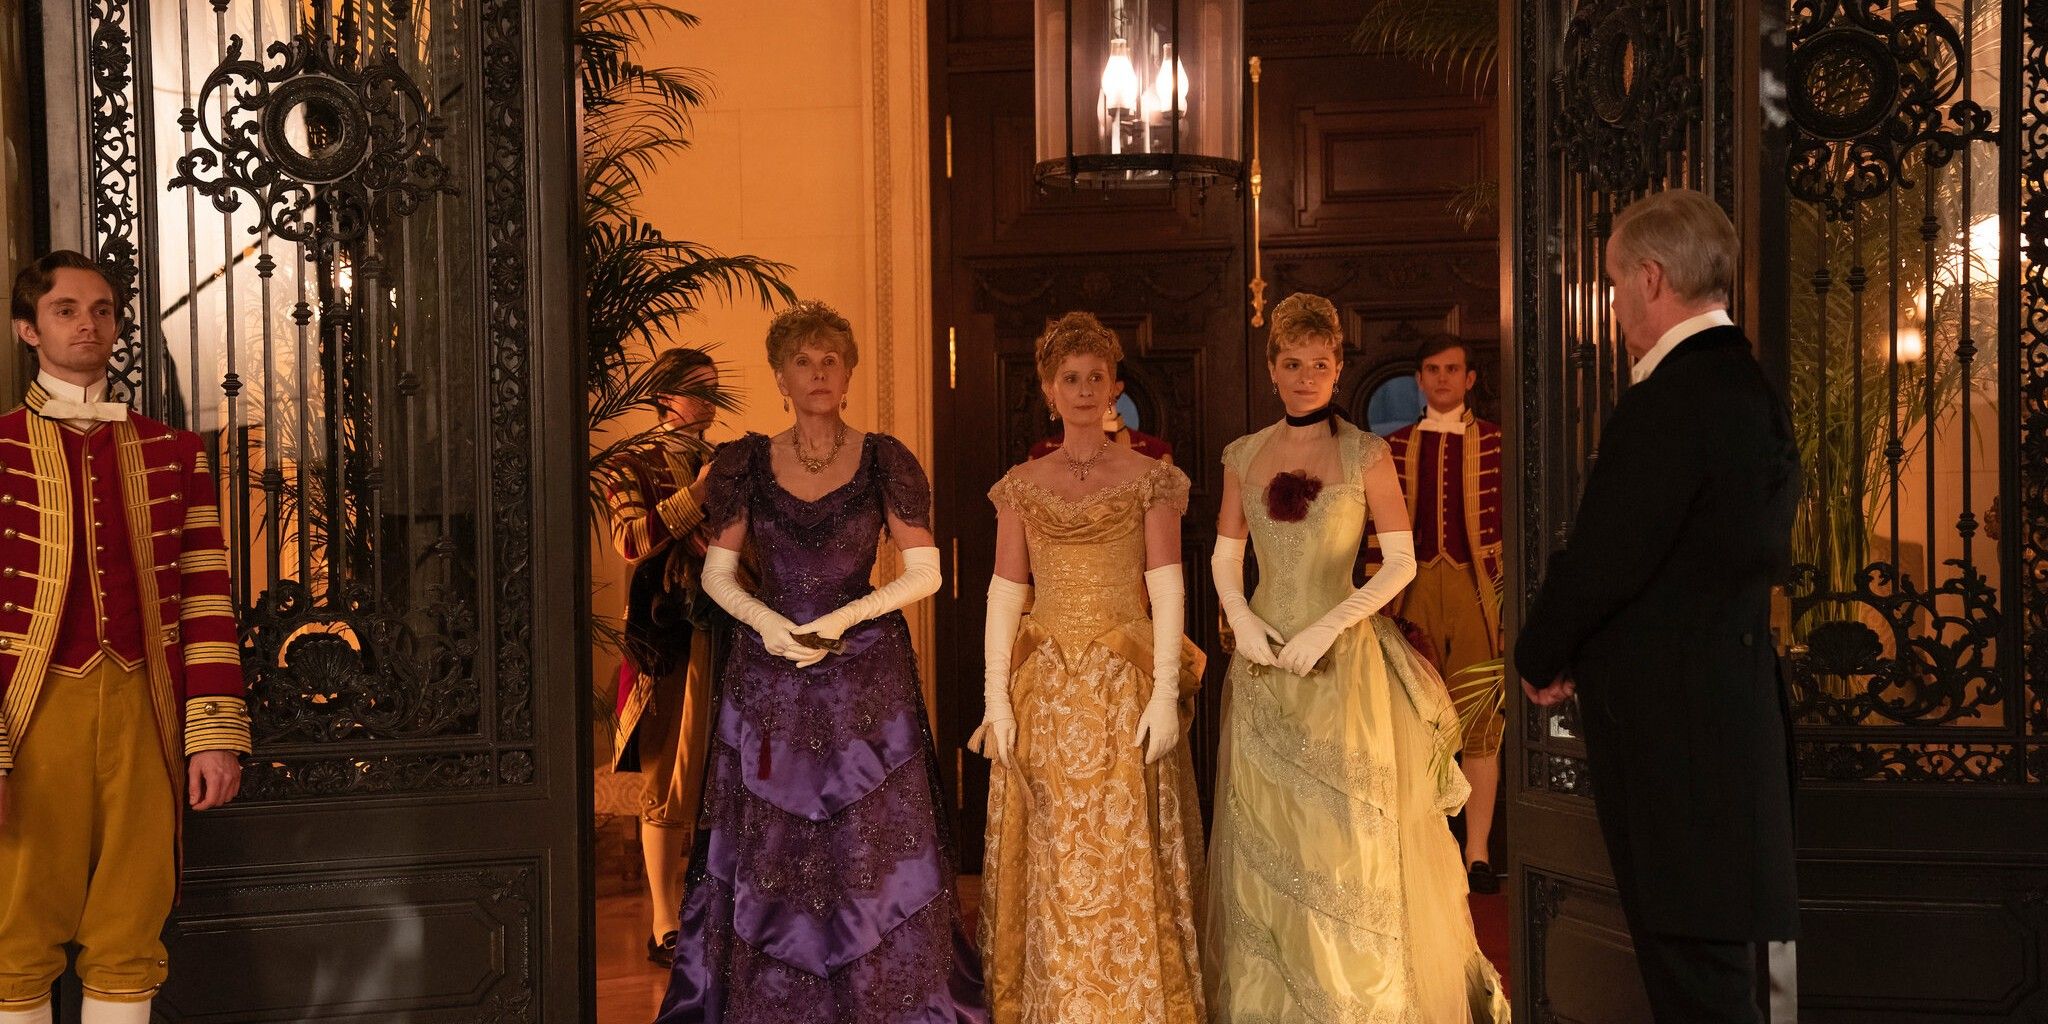 Marian and her aunts arrive at a house in the Gilded Age.